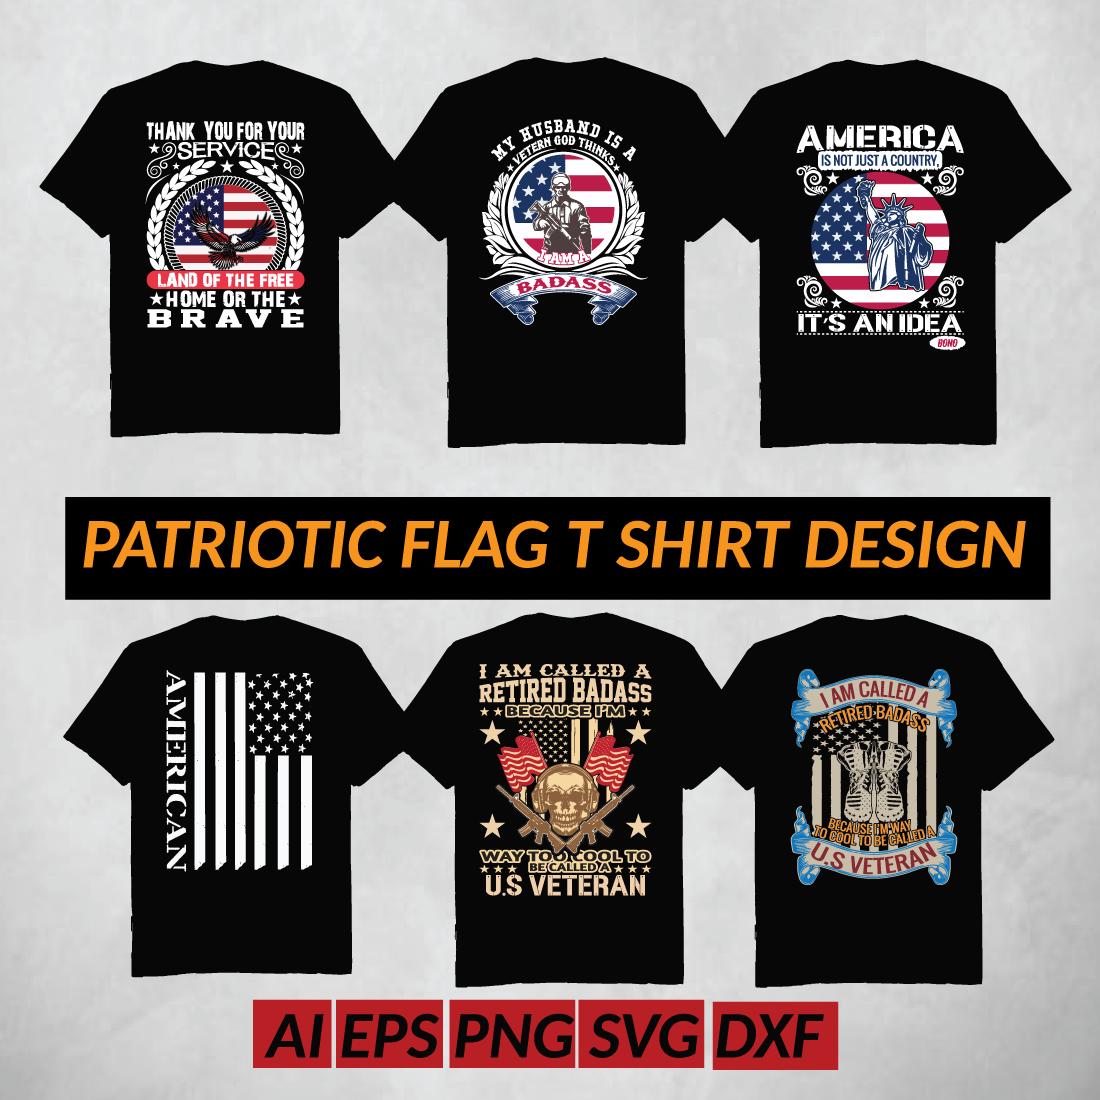 "Stand Out in Style with Our Patriotic Flag T-Shirt" preview image.